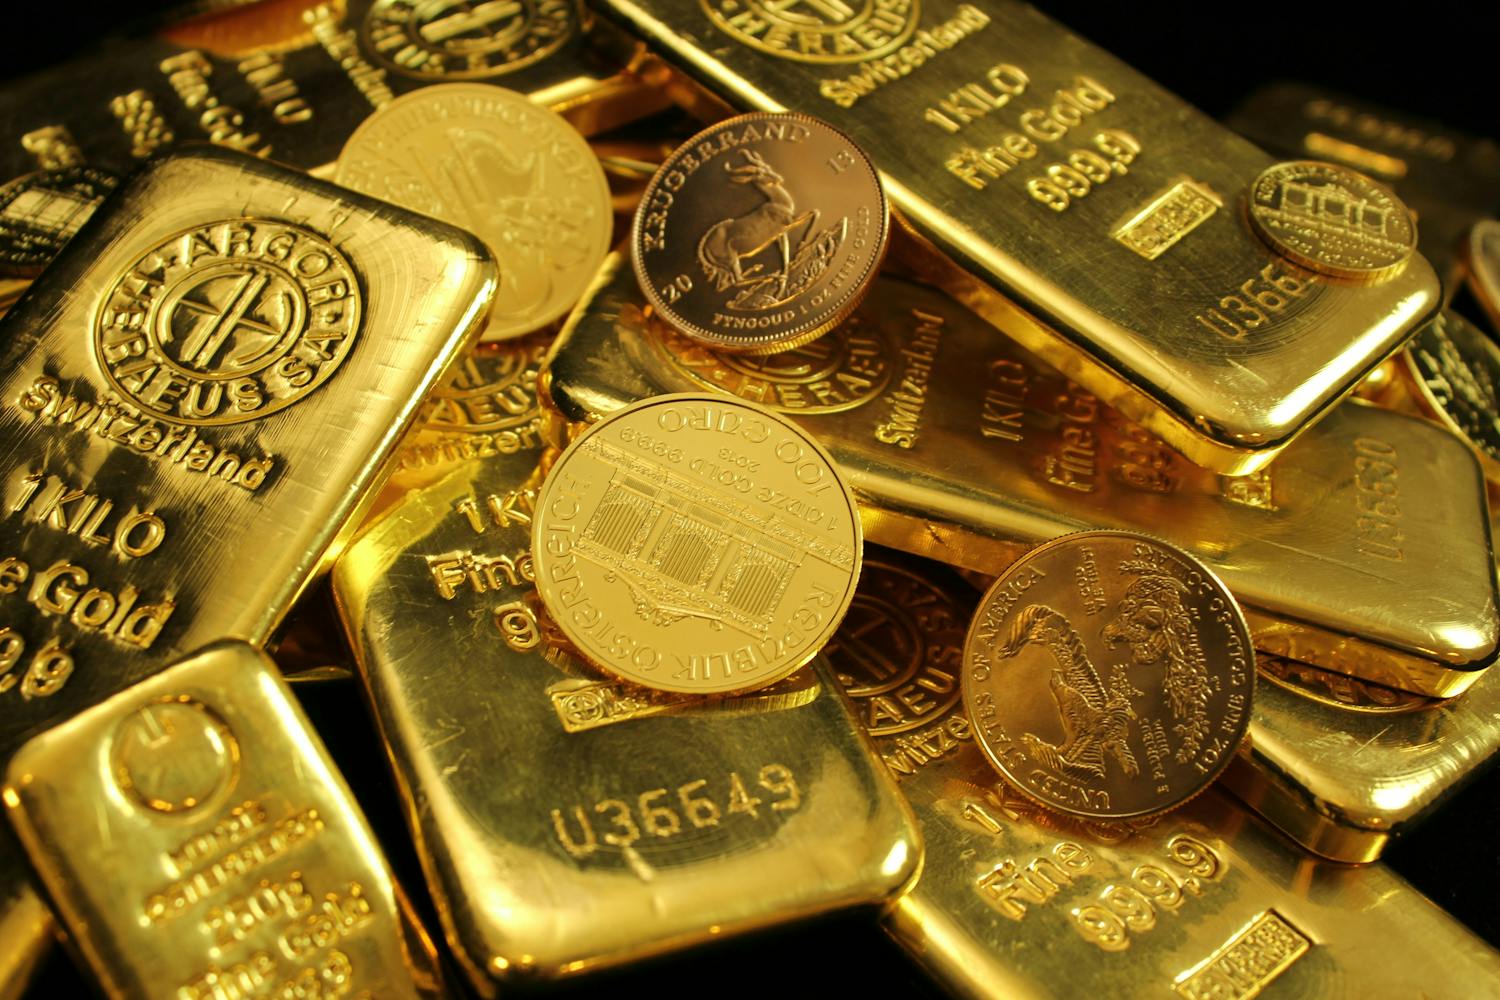 Central banks want to fill their vaults with gold.